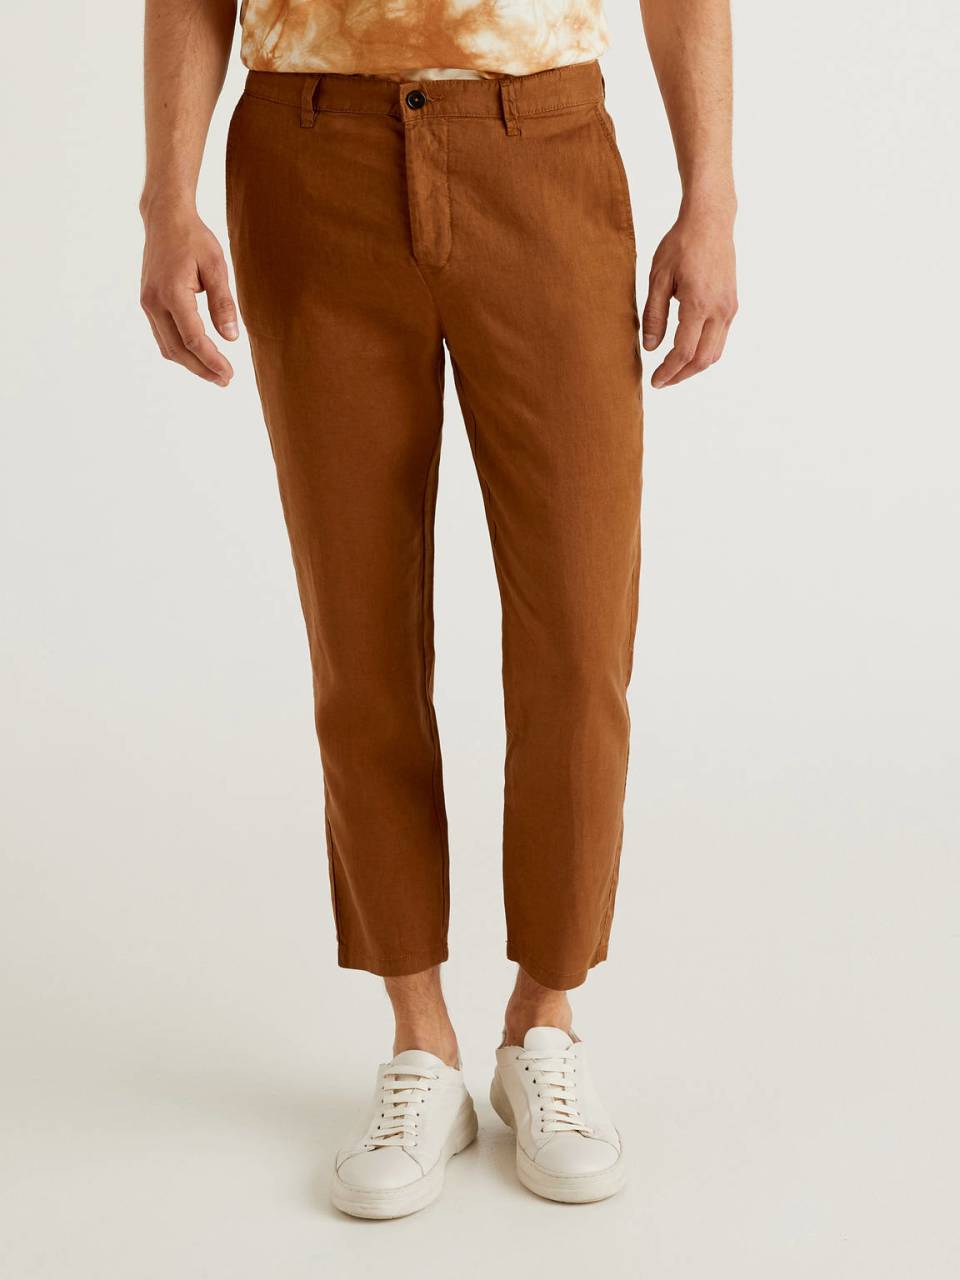 Benetton Chino pants in pure linen. 1